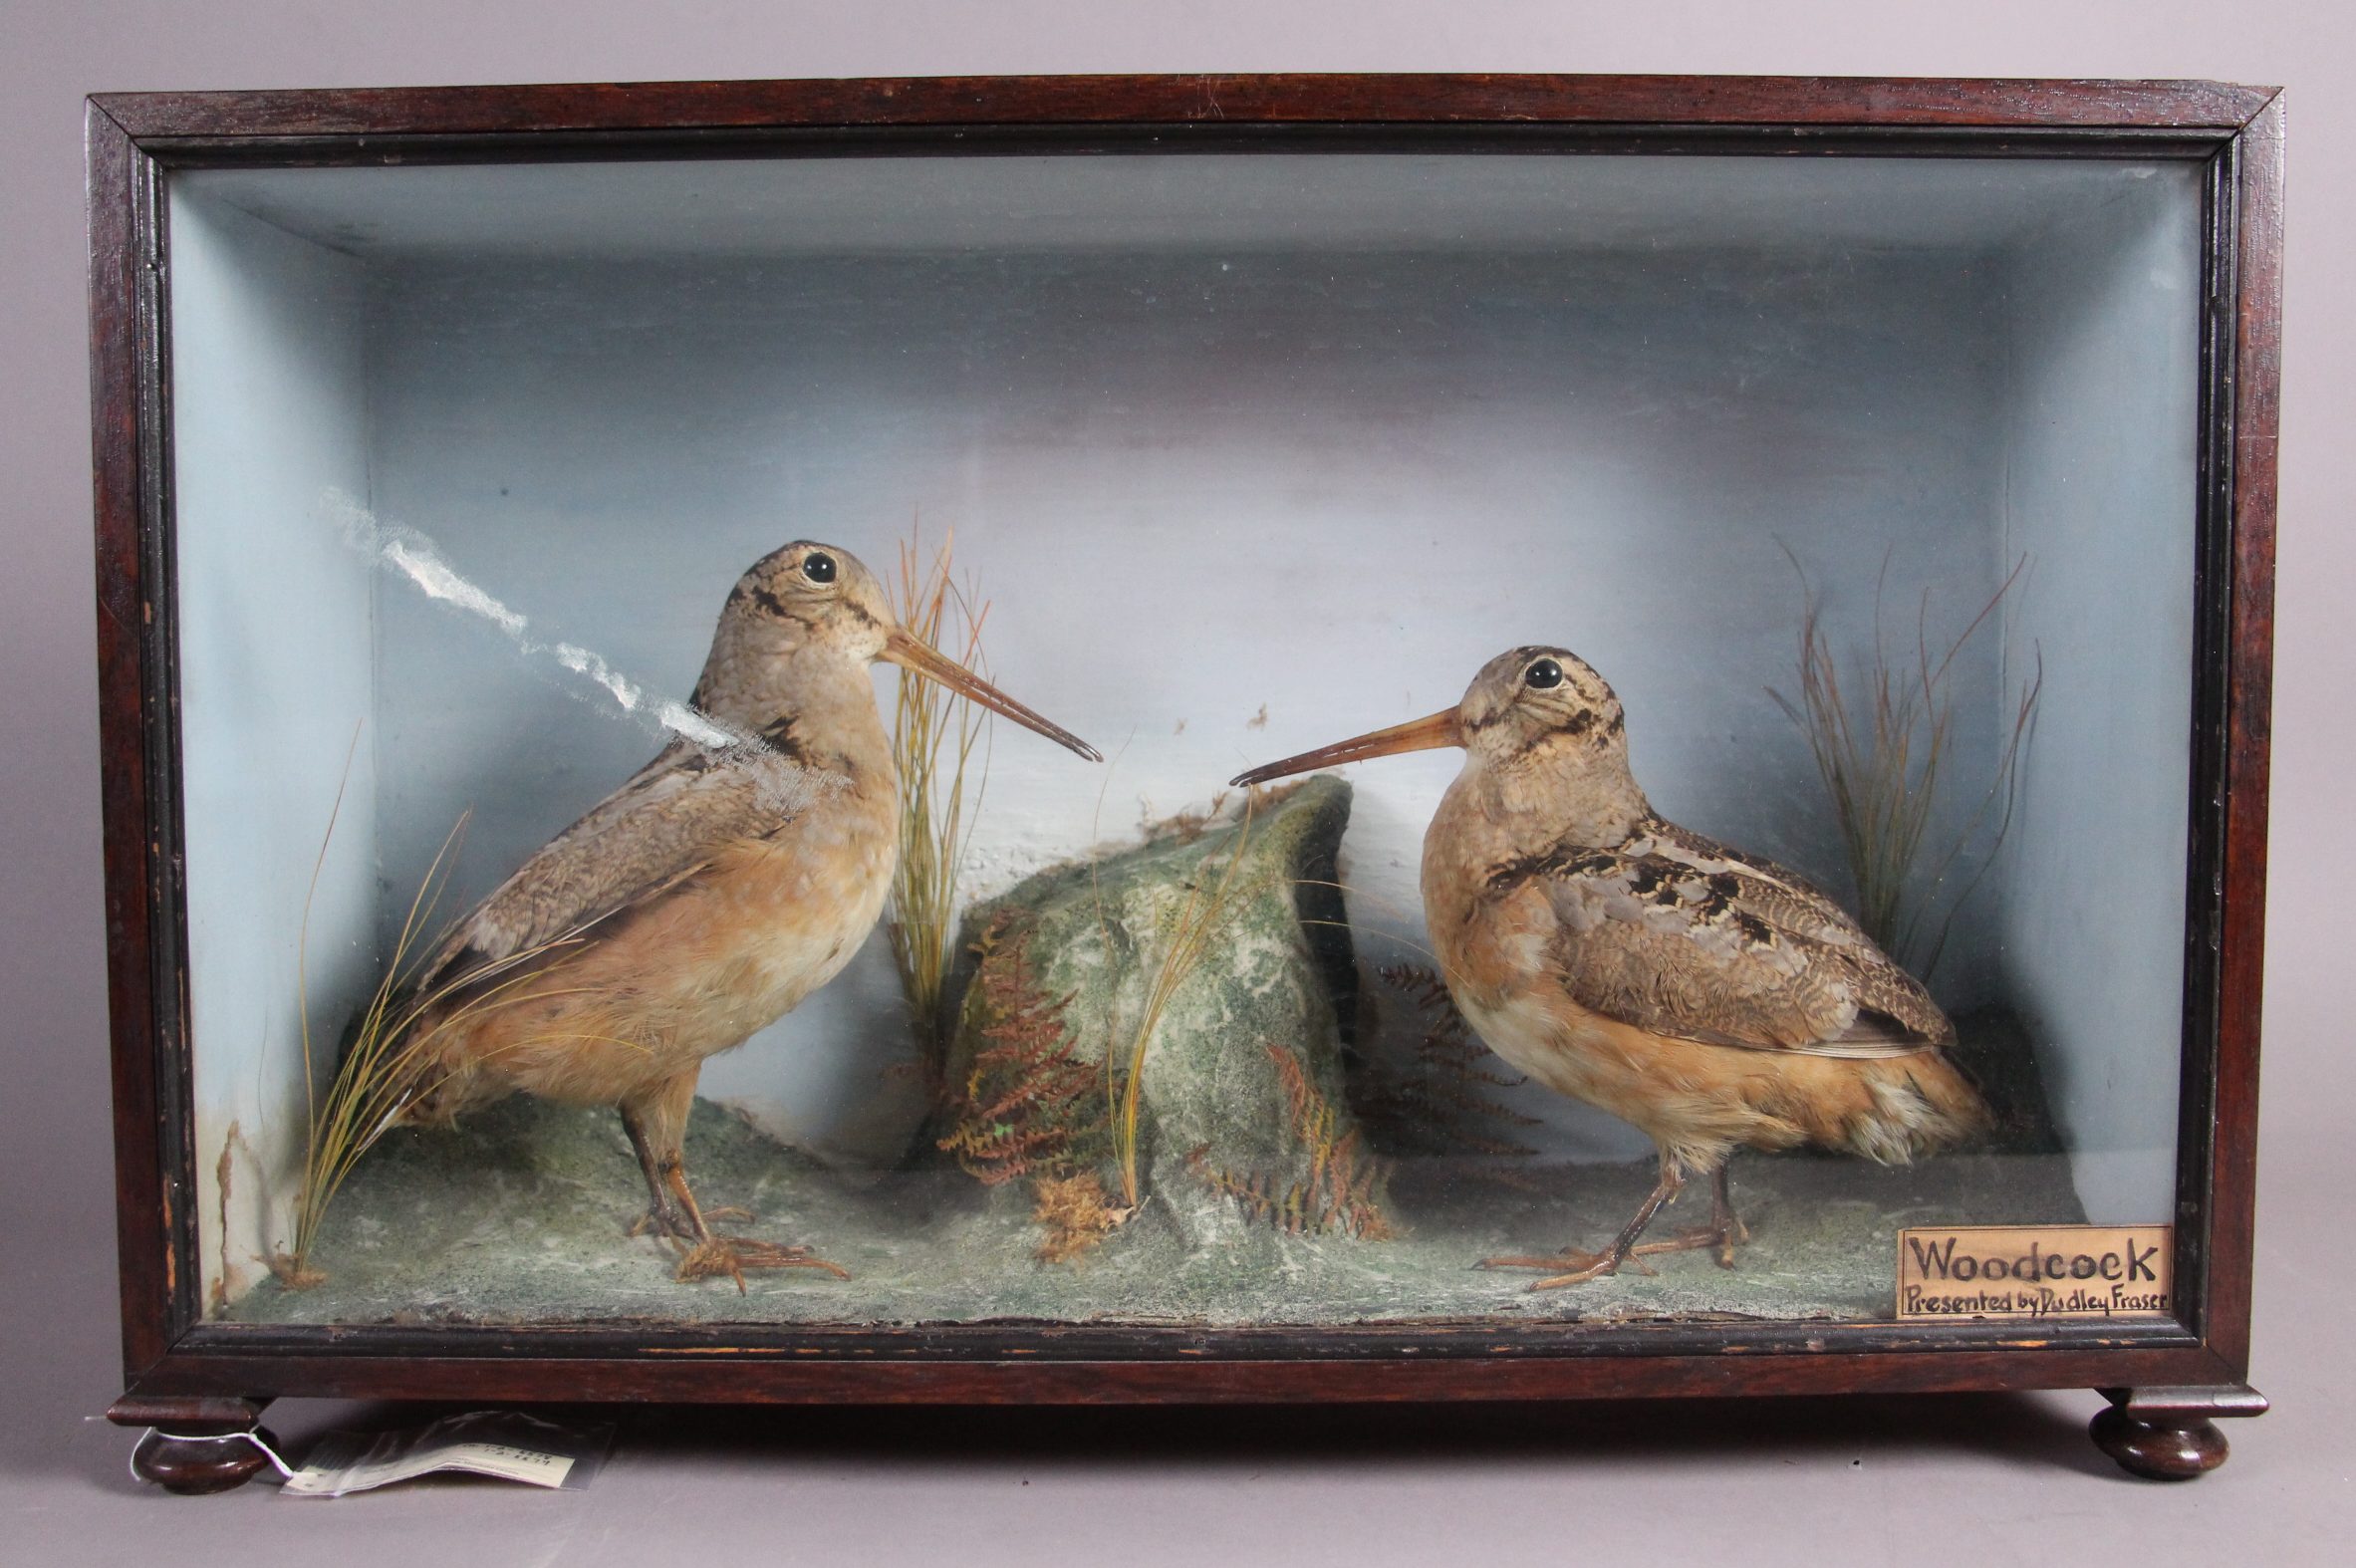 A wood and glass display case containing a pair of Woodcocks, tawny birds with long thin beaks.